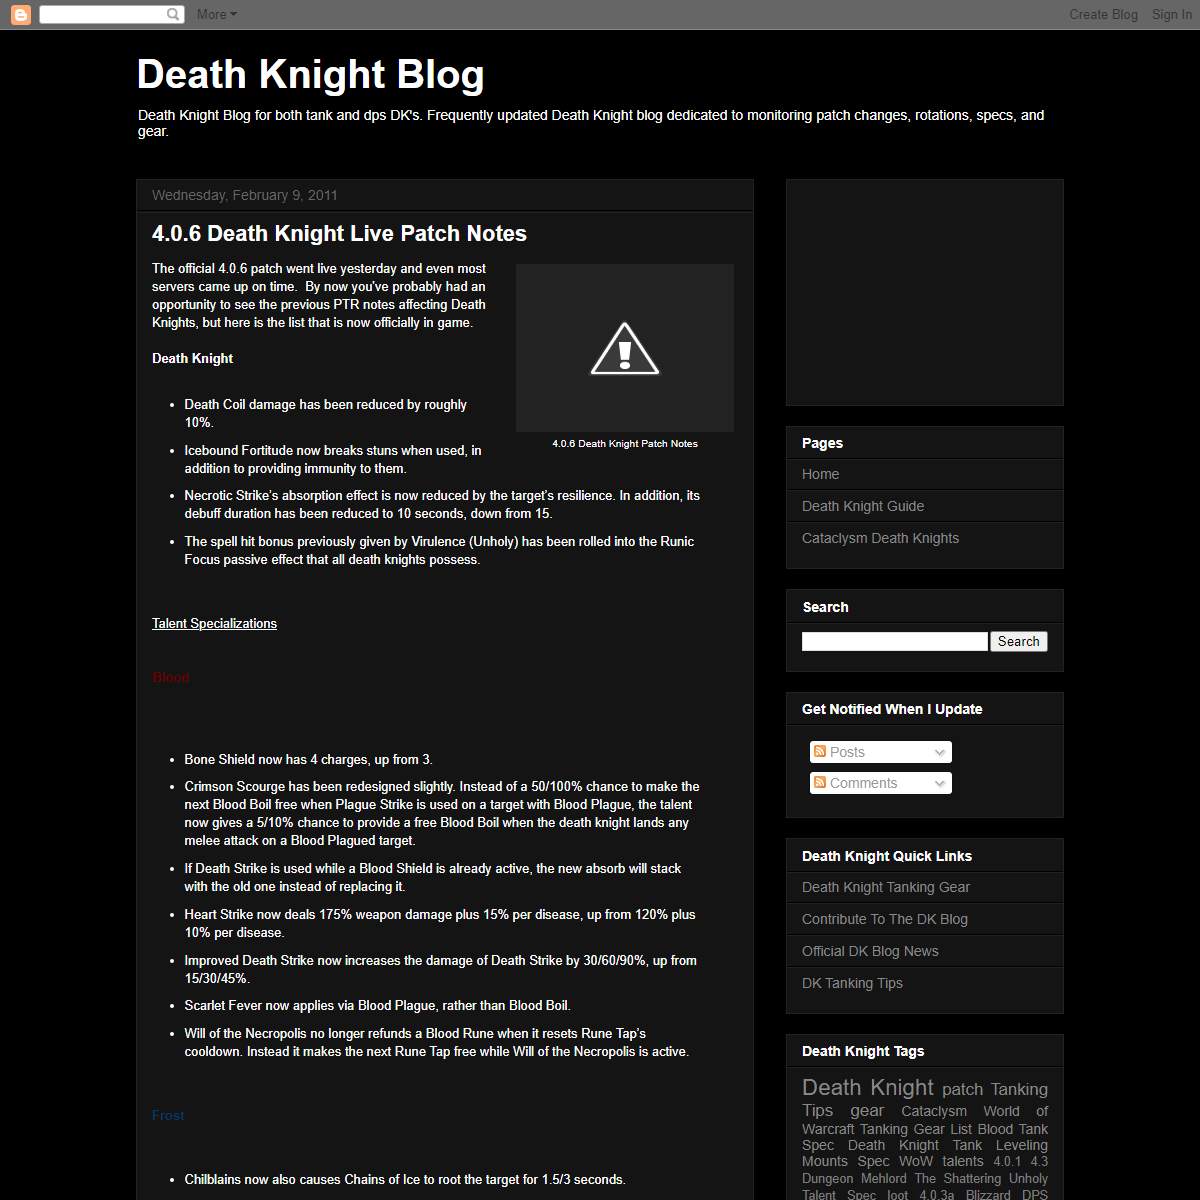 A complete backup of https://deathknight-blog.blogspot.com/2011/02/406-death-knight-live-patch-notes.html